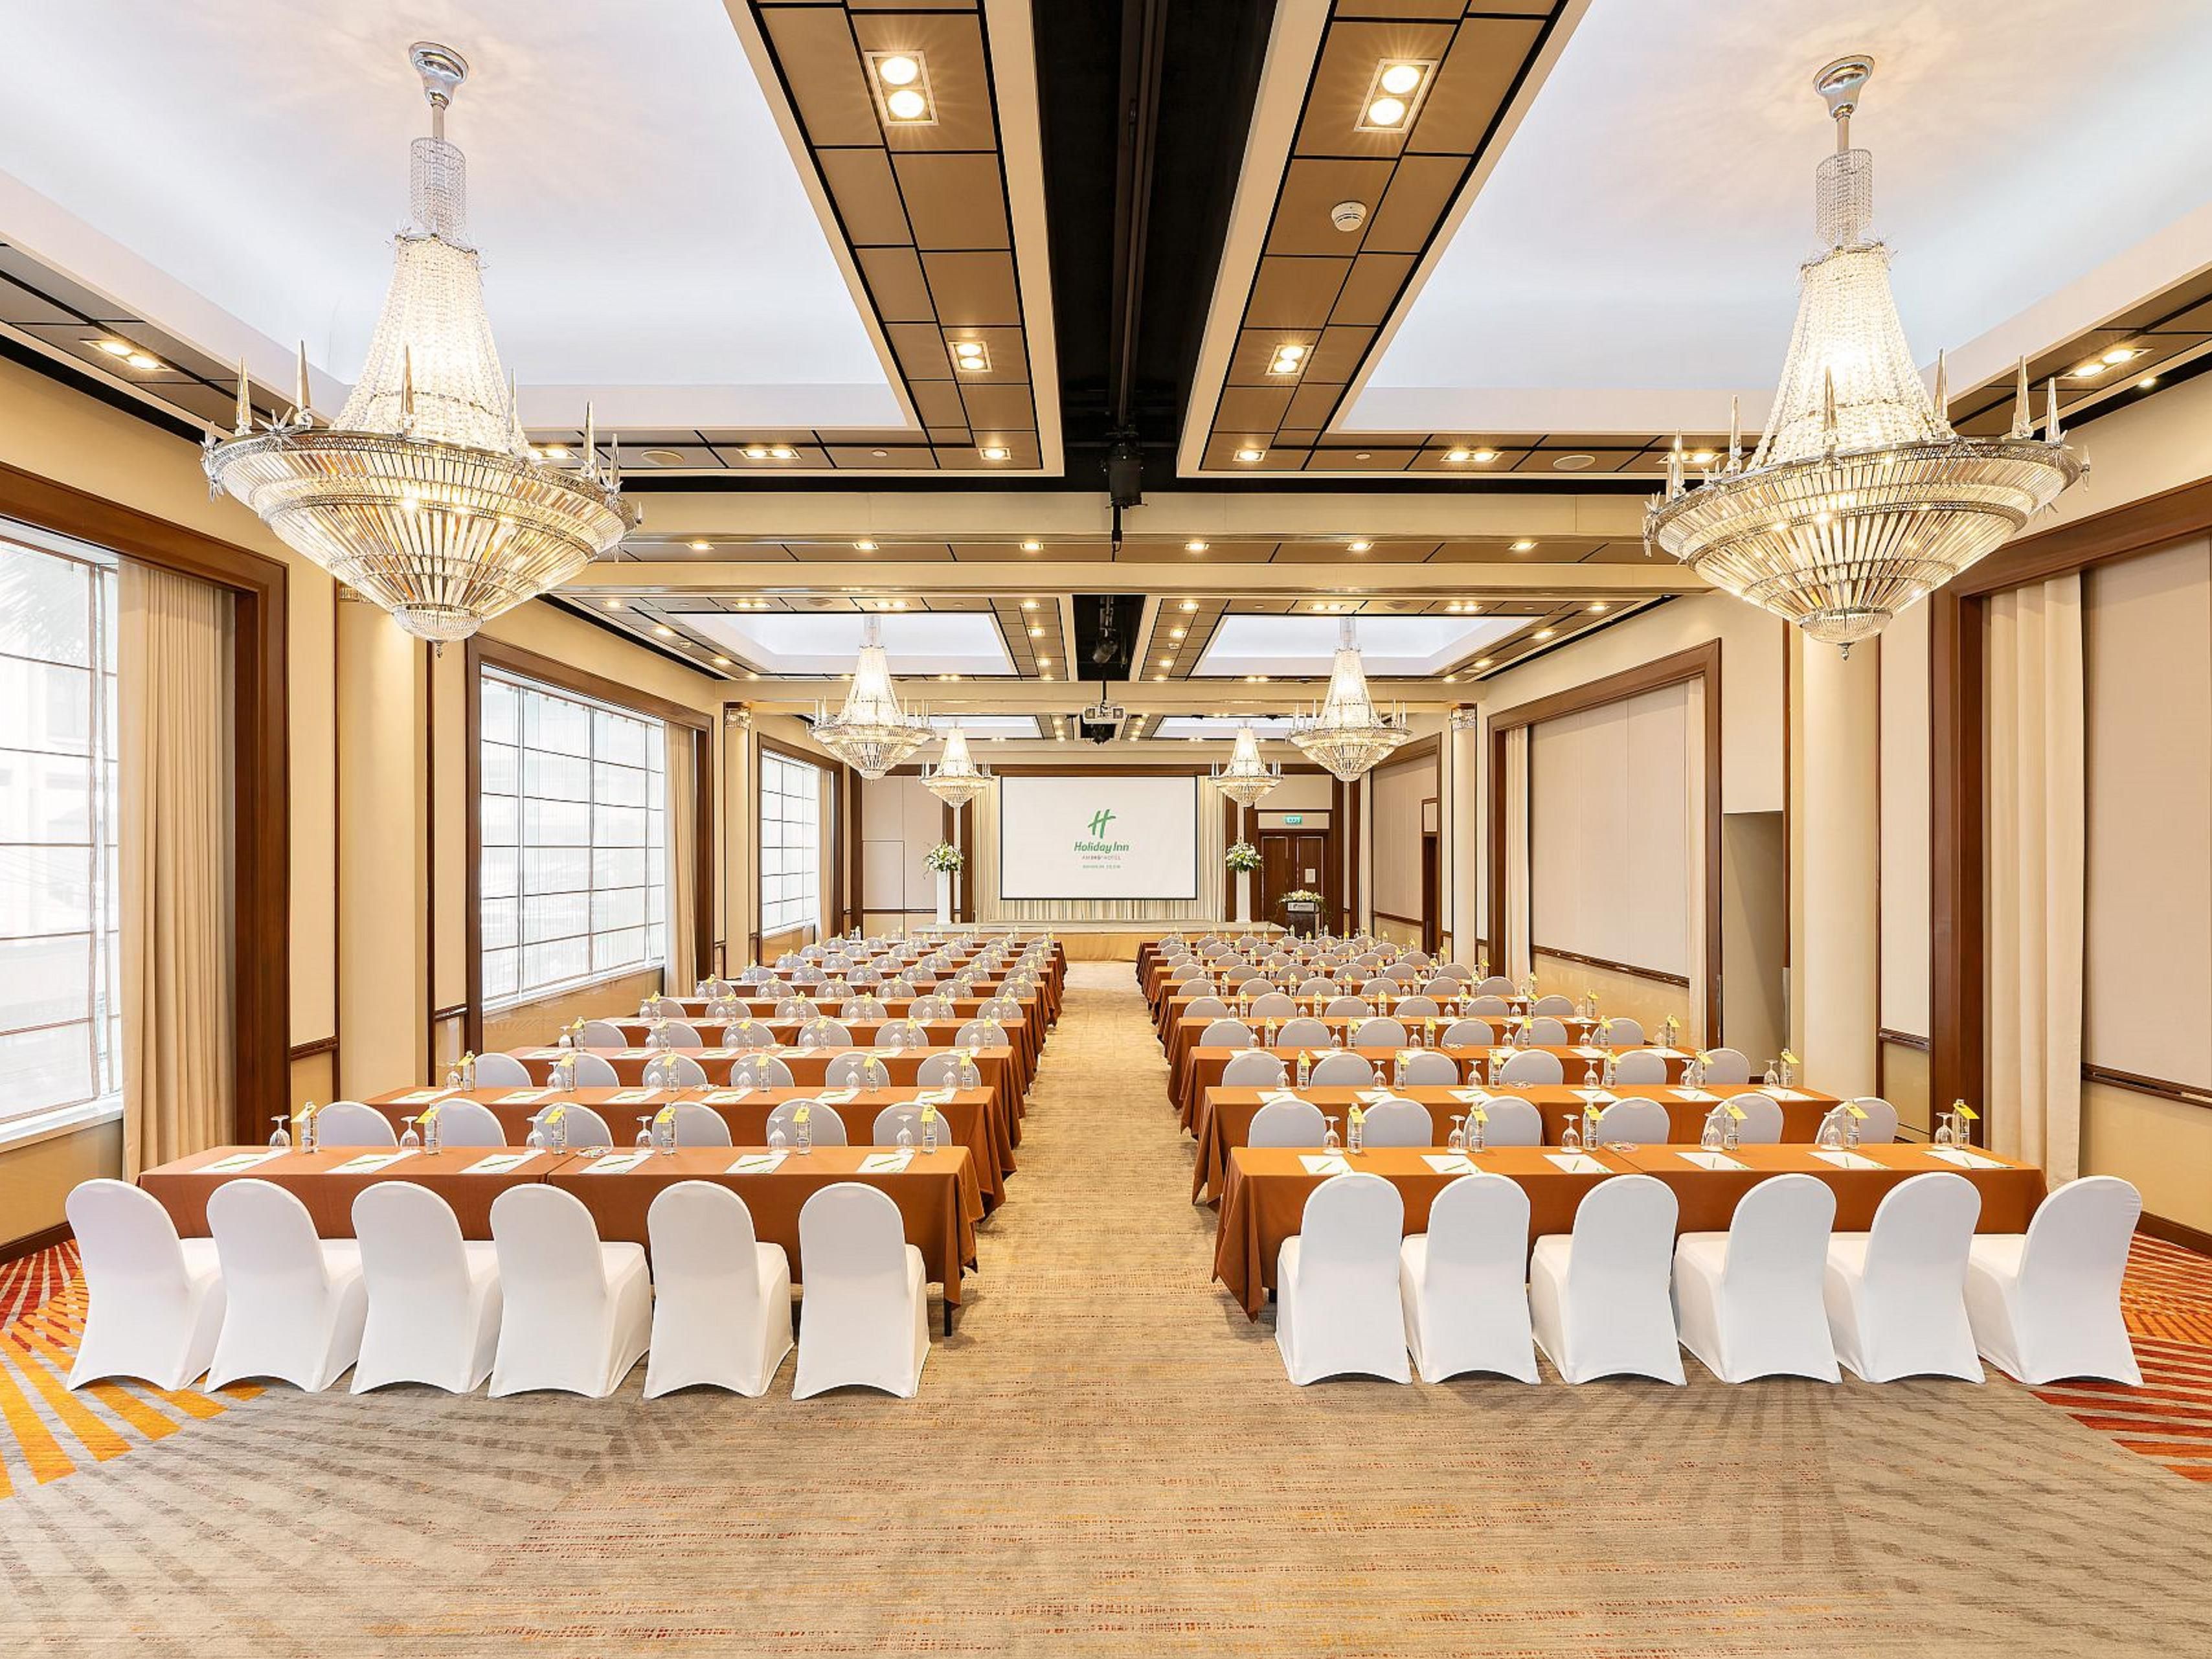 Host your Bangkok event in our versatile venues. Featuring two grand ballrooms with vaulted ceilings and natural light, and nine meeting rooms, we cater to corporate and social gatherings for up to 700 guests. From weddings to conferences, our thoughtfully designed spaces blend elegance and functionality to ensure your event is a success. 